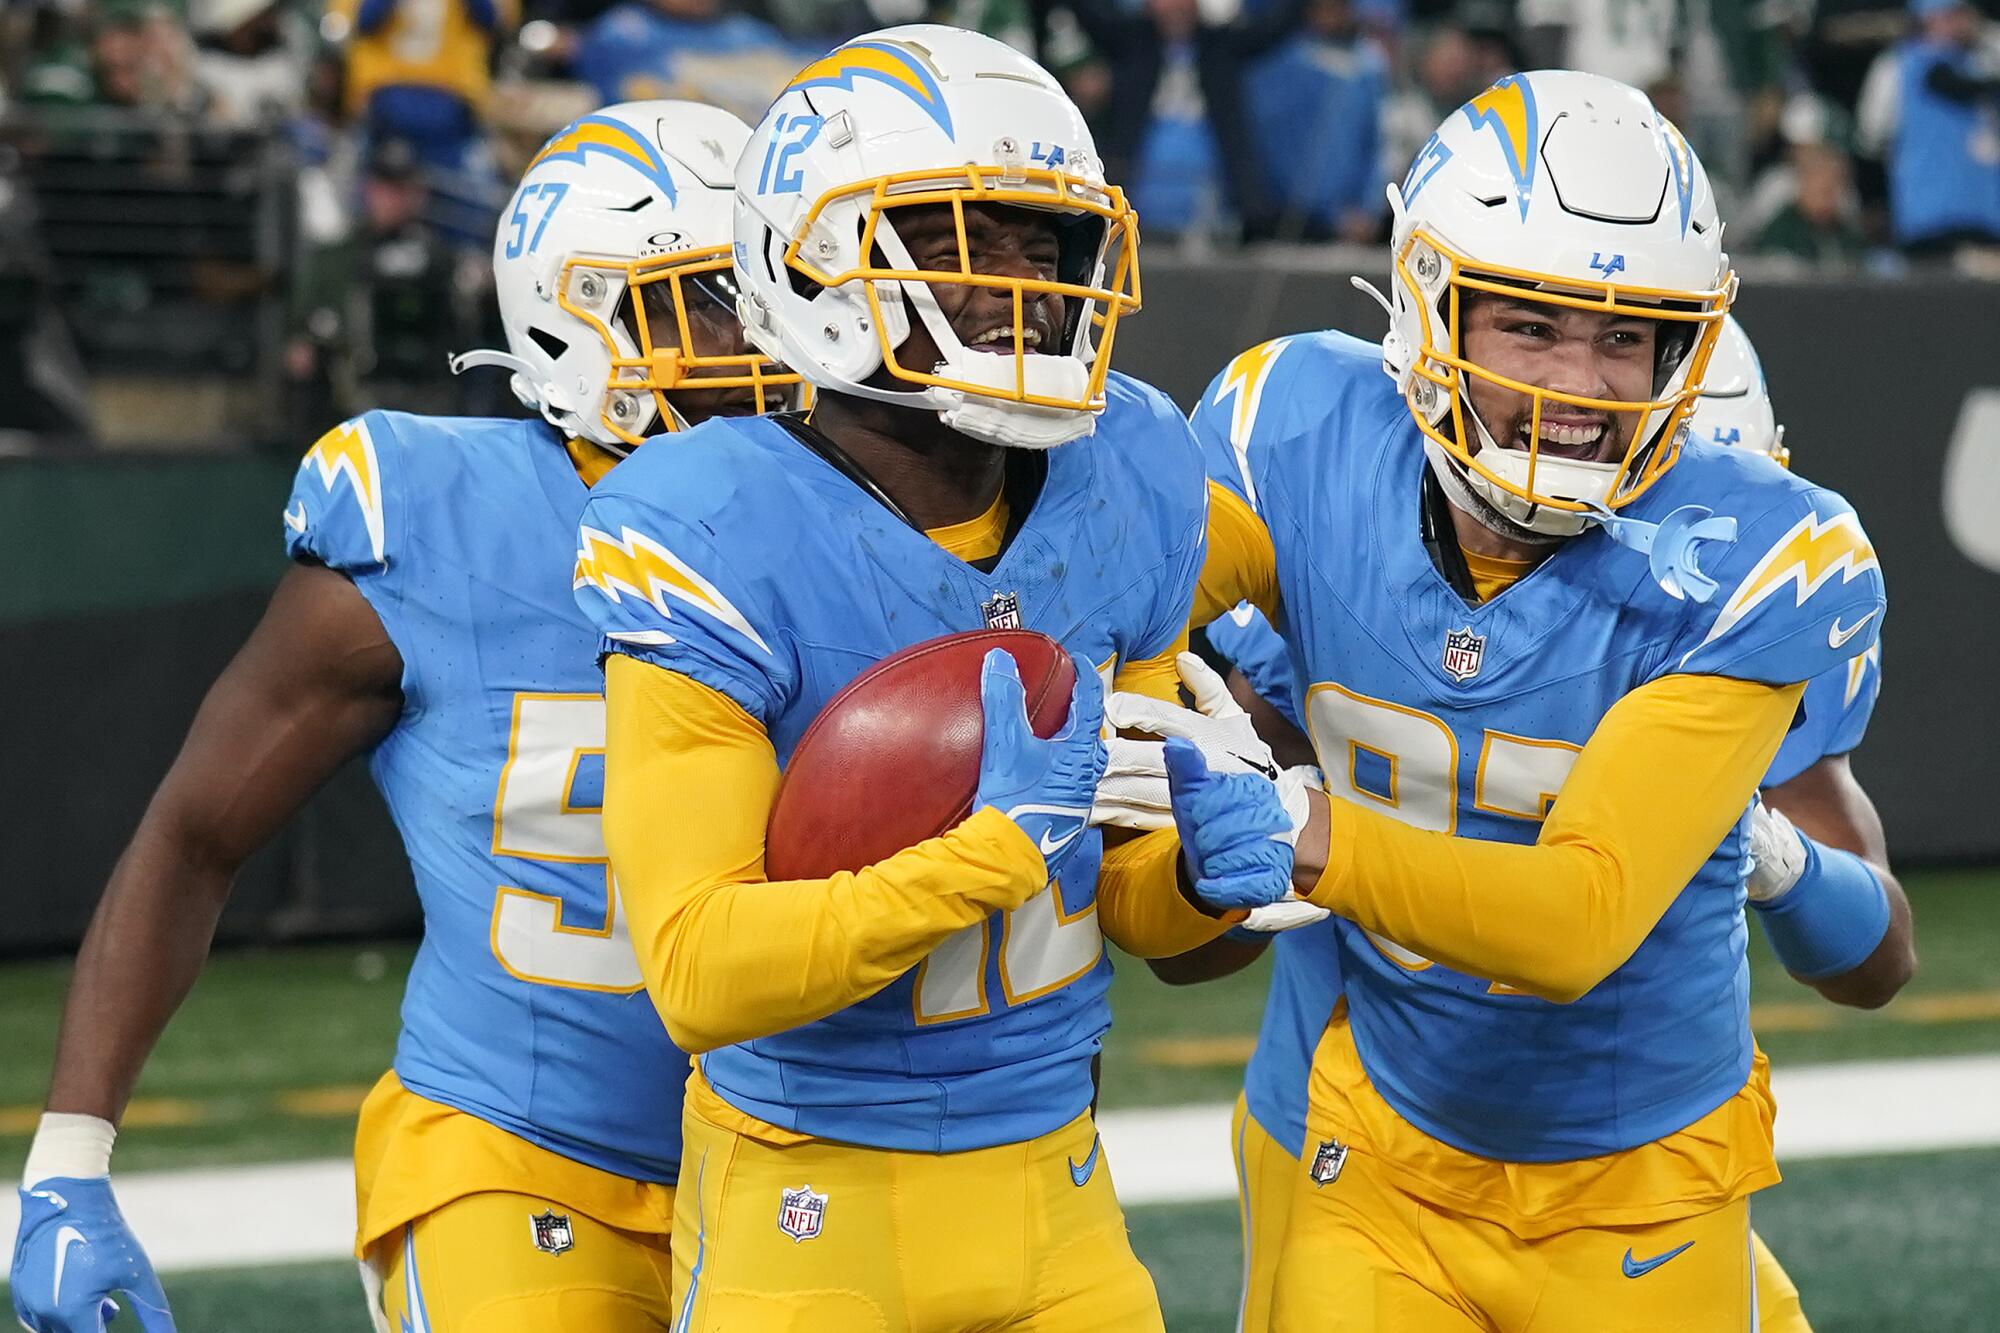 Derius Davis, left, celebrates with teammates after scoring on an 87-yard punt return against the New York Jets.